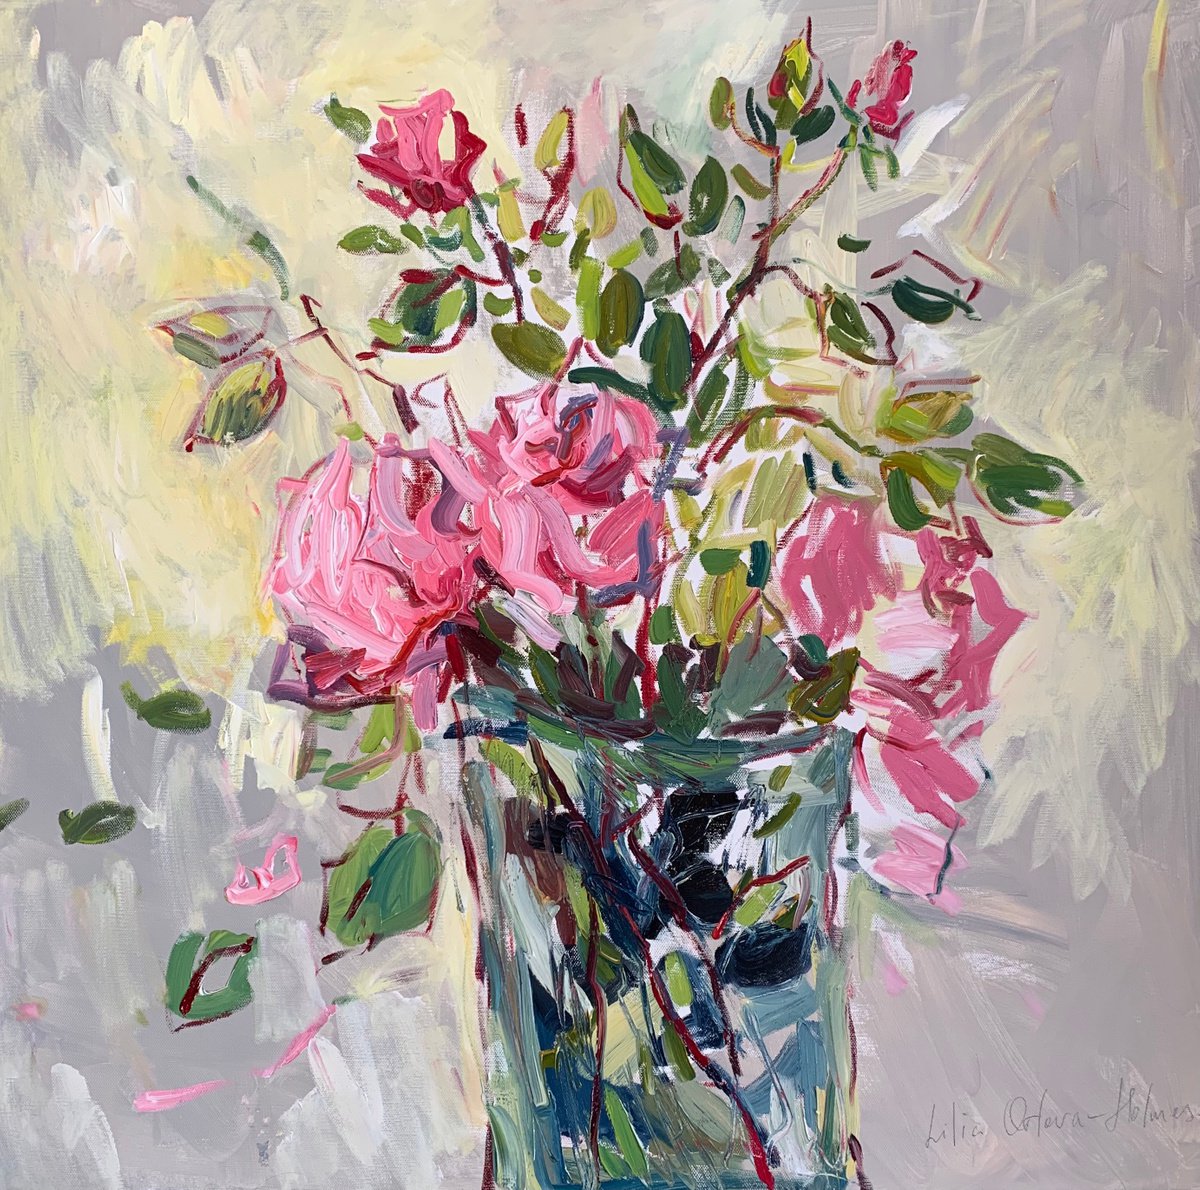 Roses from my garden. by Lilia Orlova-Holmes